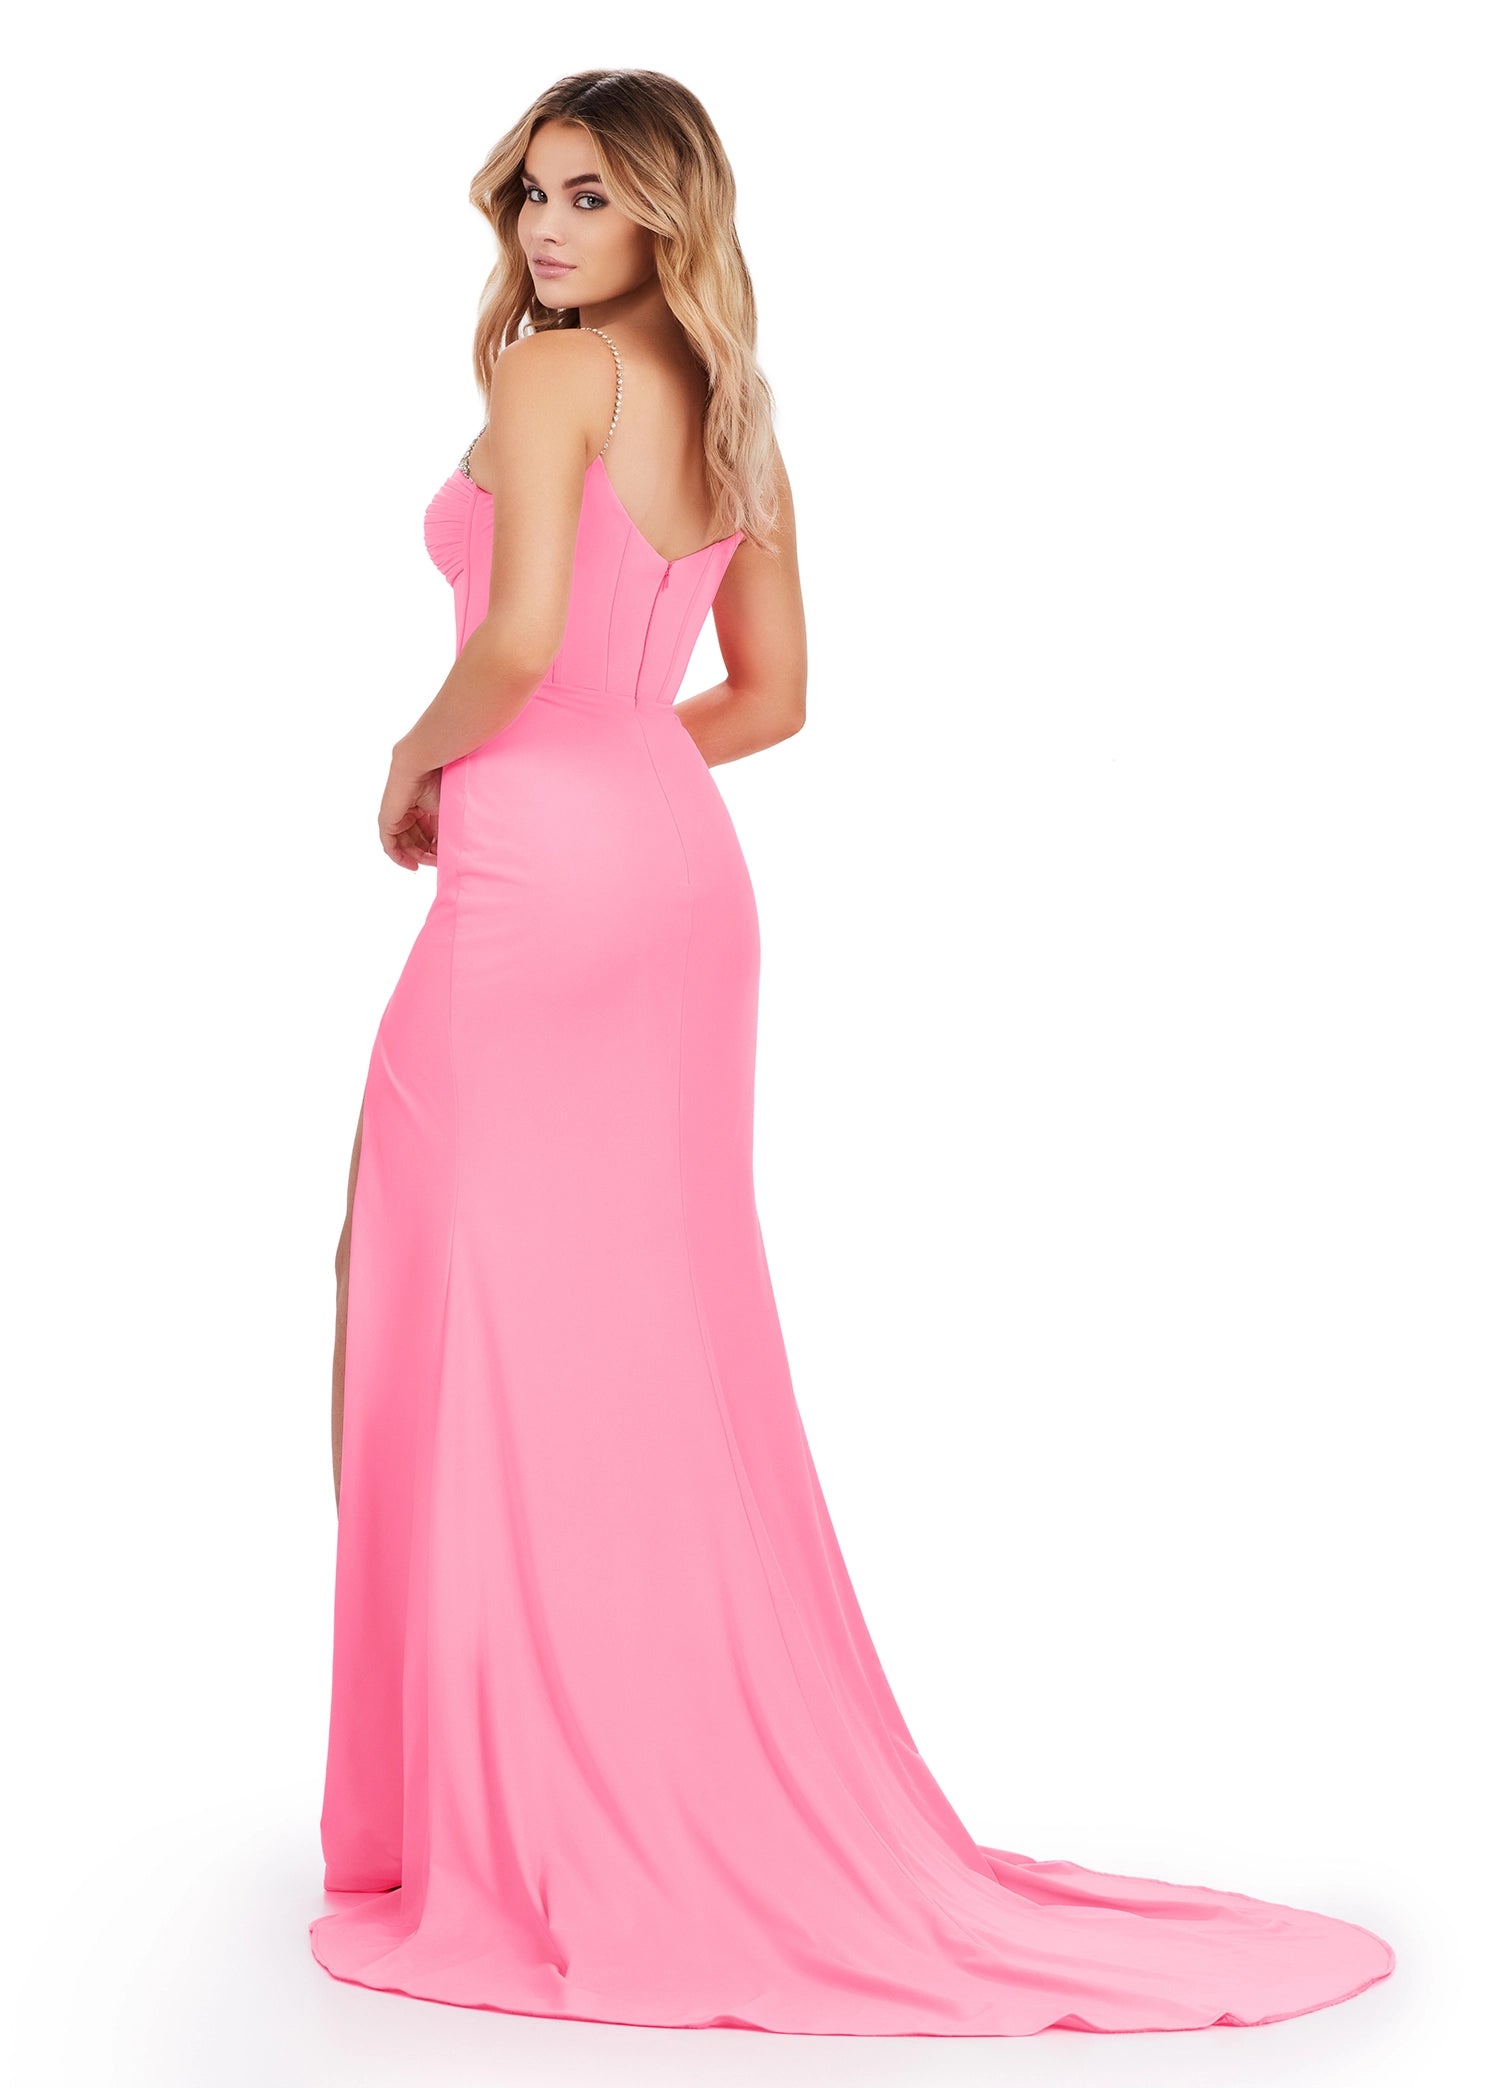 The Ashley Lauren 11538 Long Jersey Maxi Slit Corset Prom Dress offers an unforgettable look with its crystal straps and corset-style top for a flattering fit. Its maxi length and side slit give a modern edge to this beautiful evening gown. Classic and fabulous! This jersey gown features beaded spaghetti straps and a ruched skirt with beaded accents.